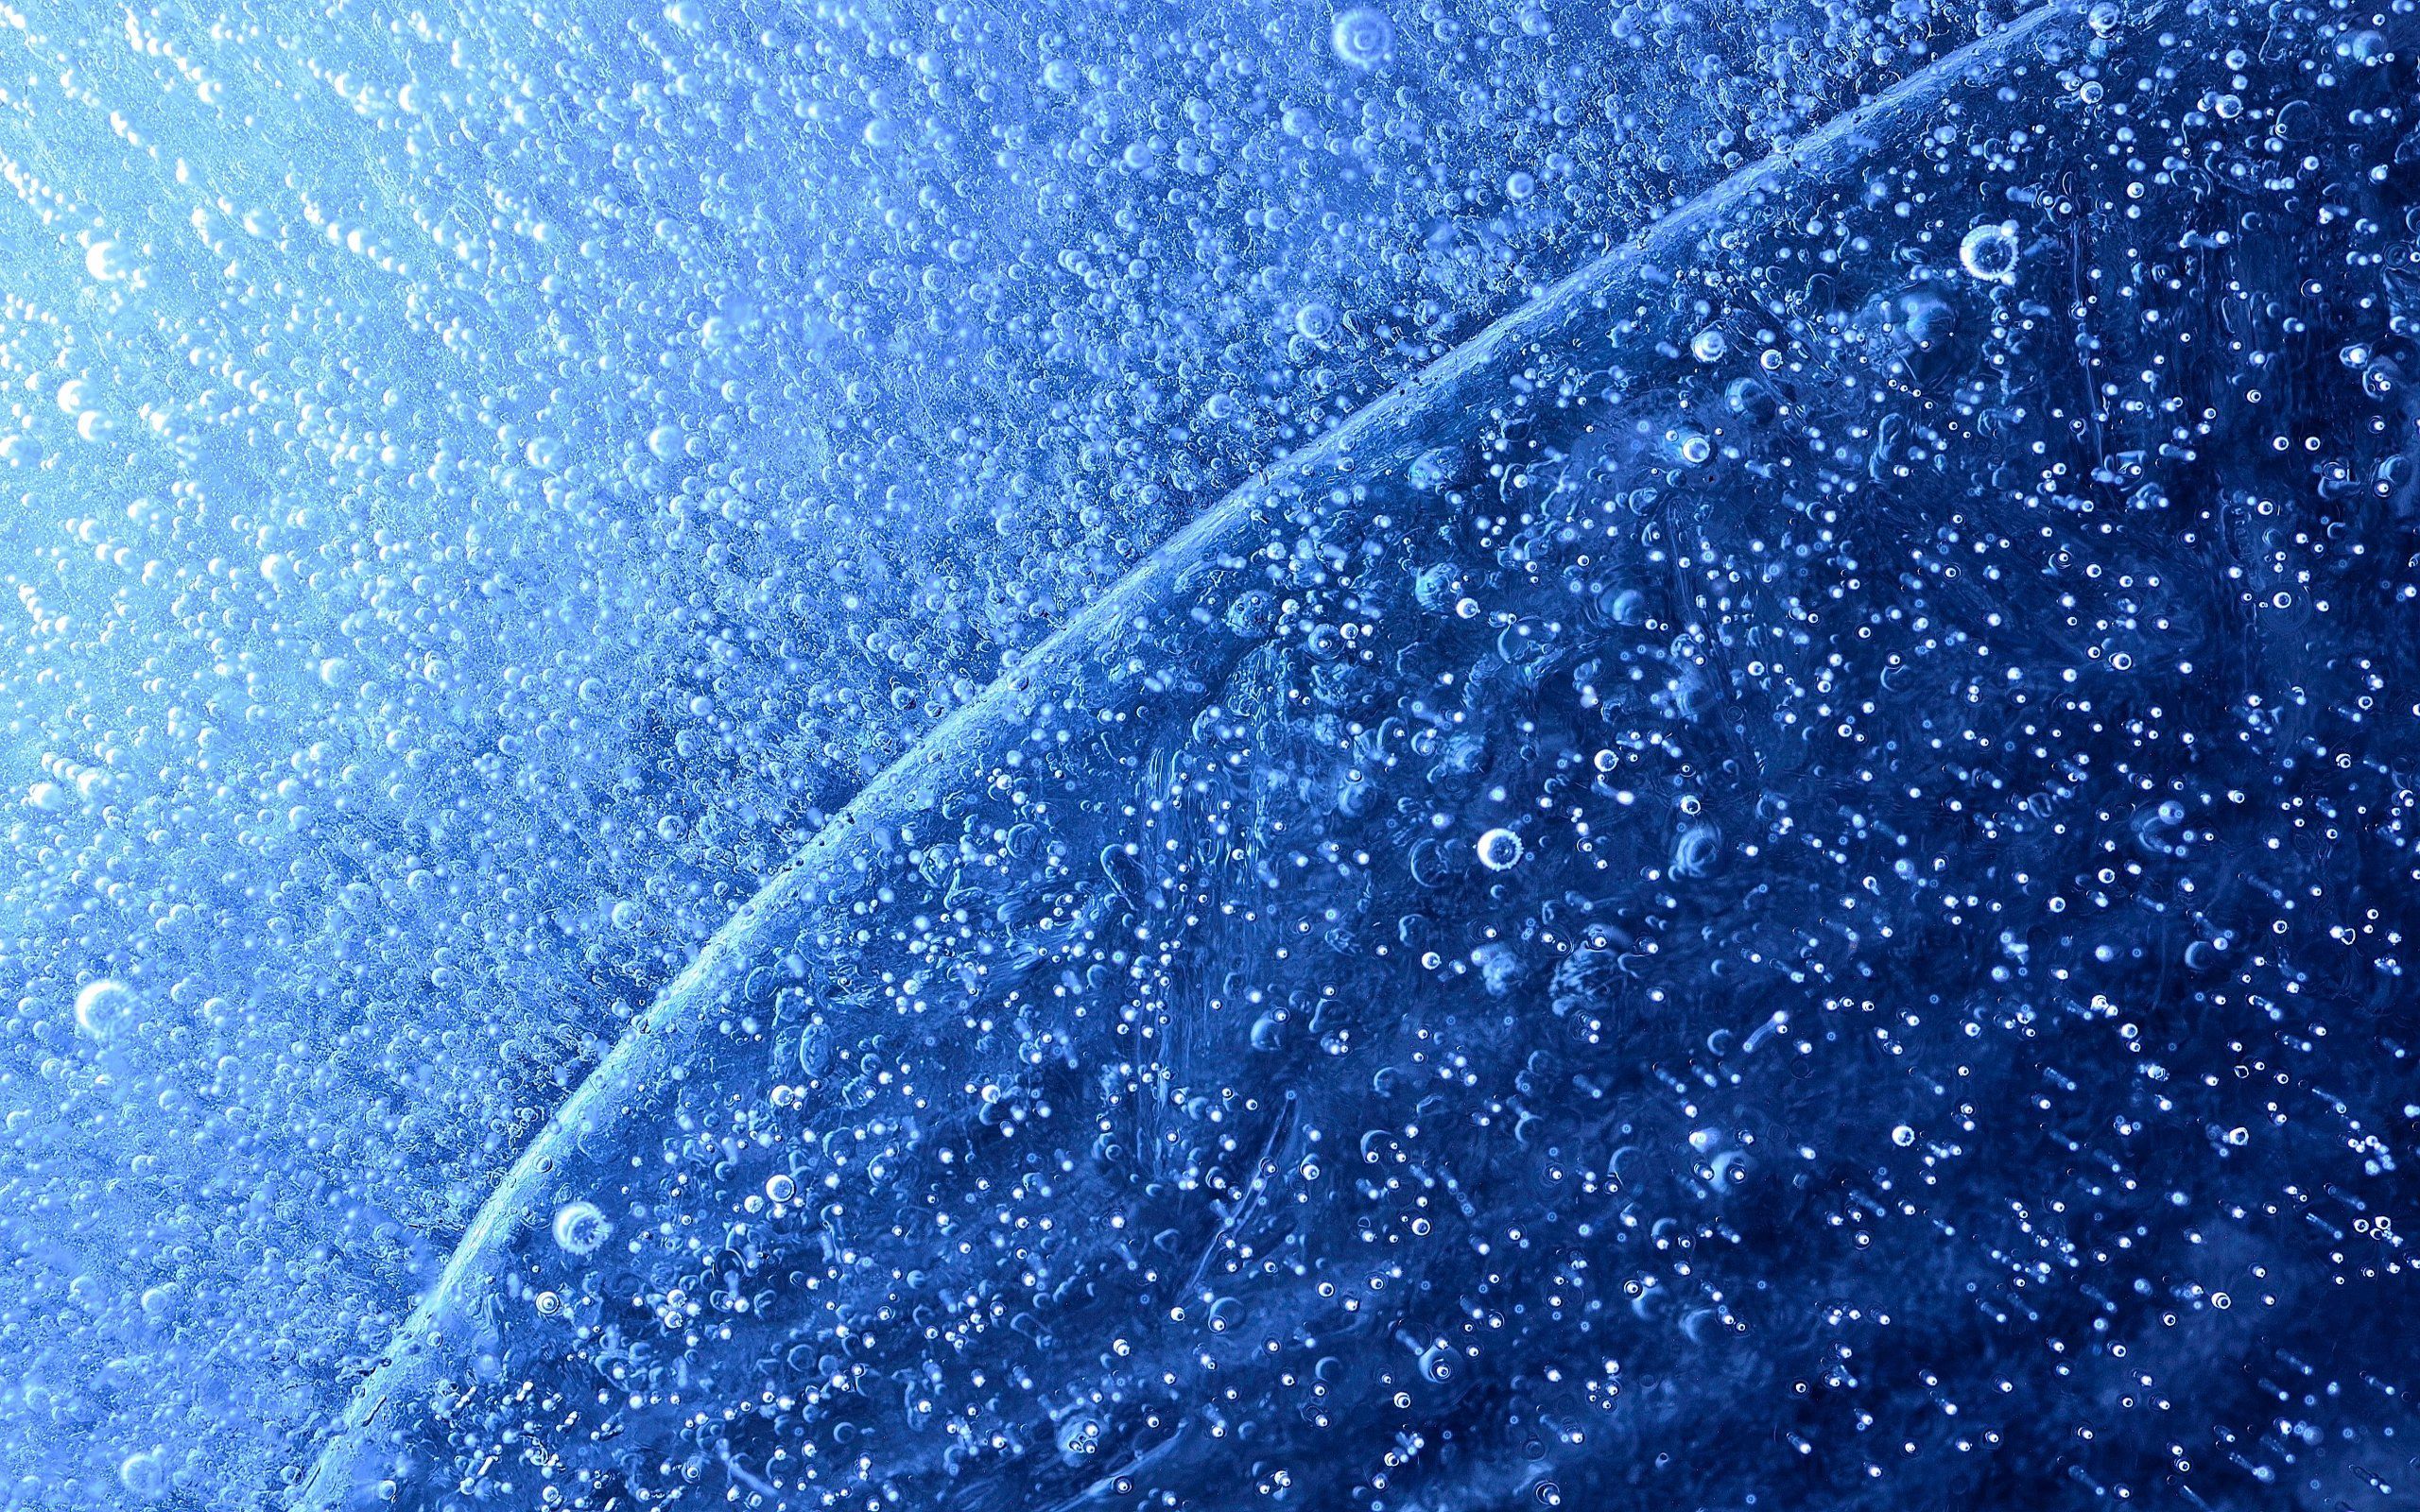 67183 1440x900 PC pictures for free, download drops, macro, blue, snow 1440x900 wallpapers on your desktop